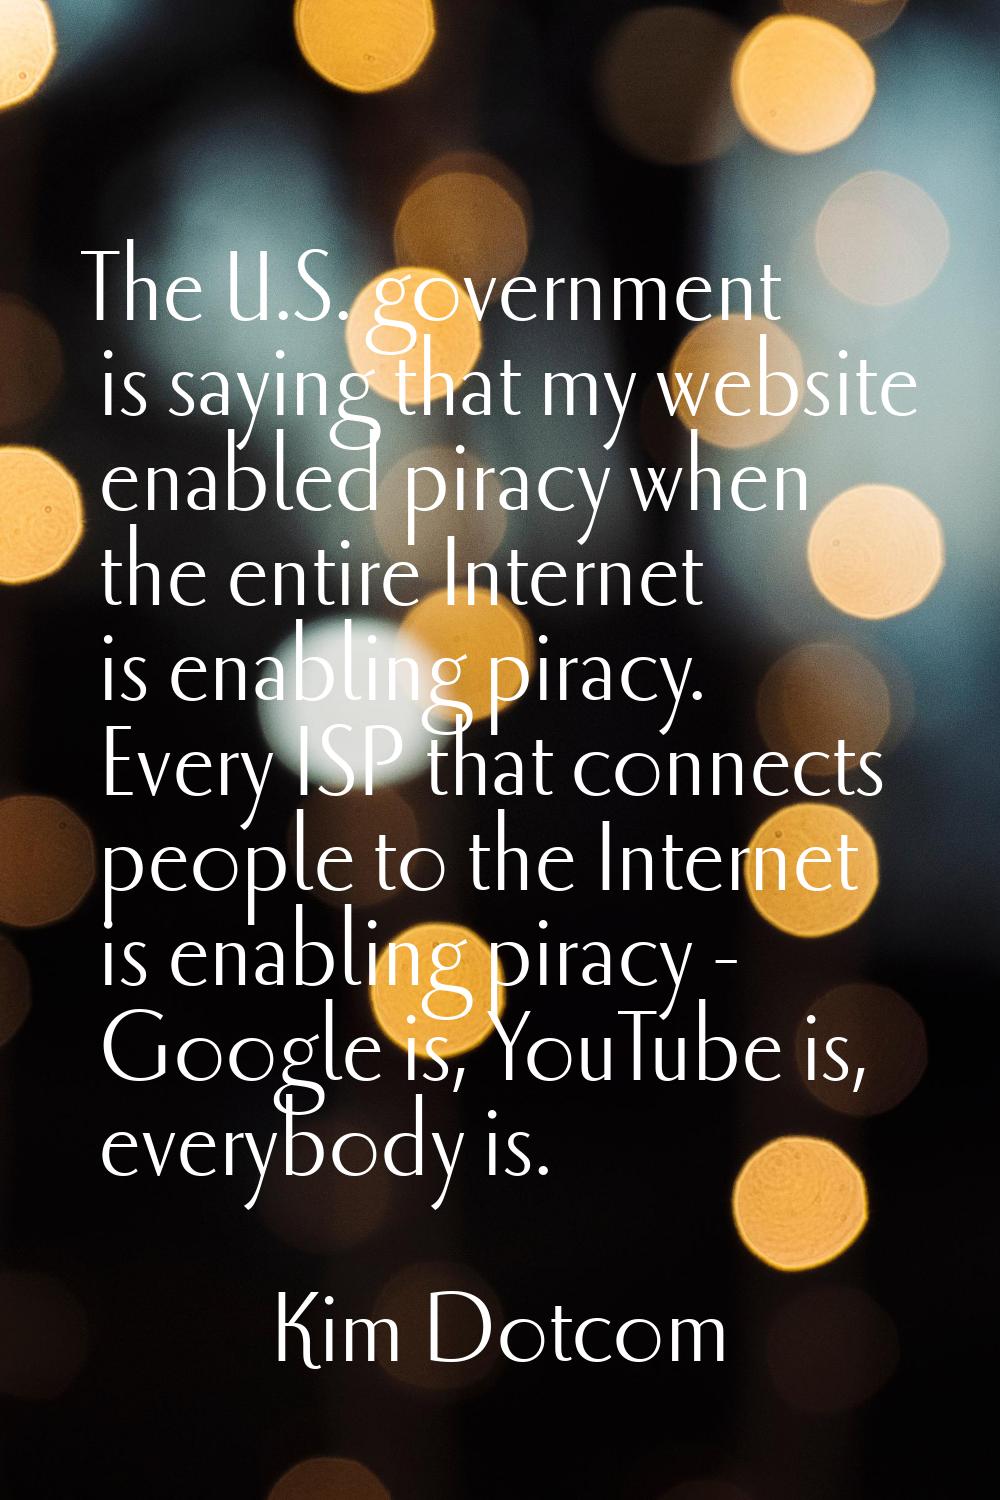 The U.S. government is saying that my website enabled piracy when the entire Internet is enabling p